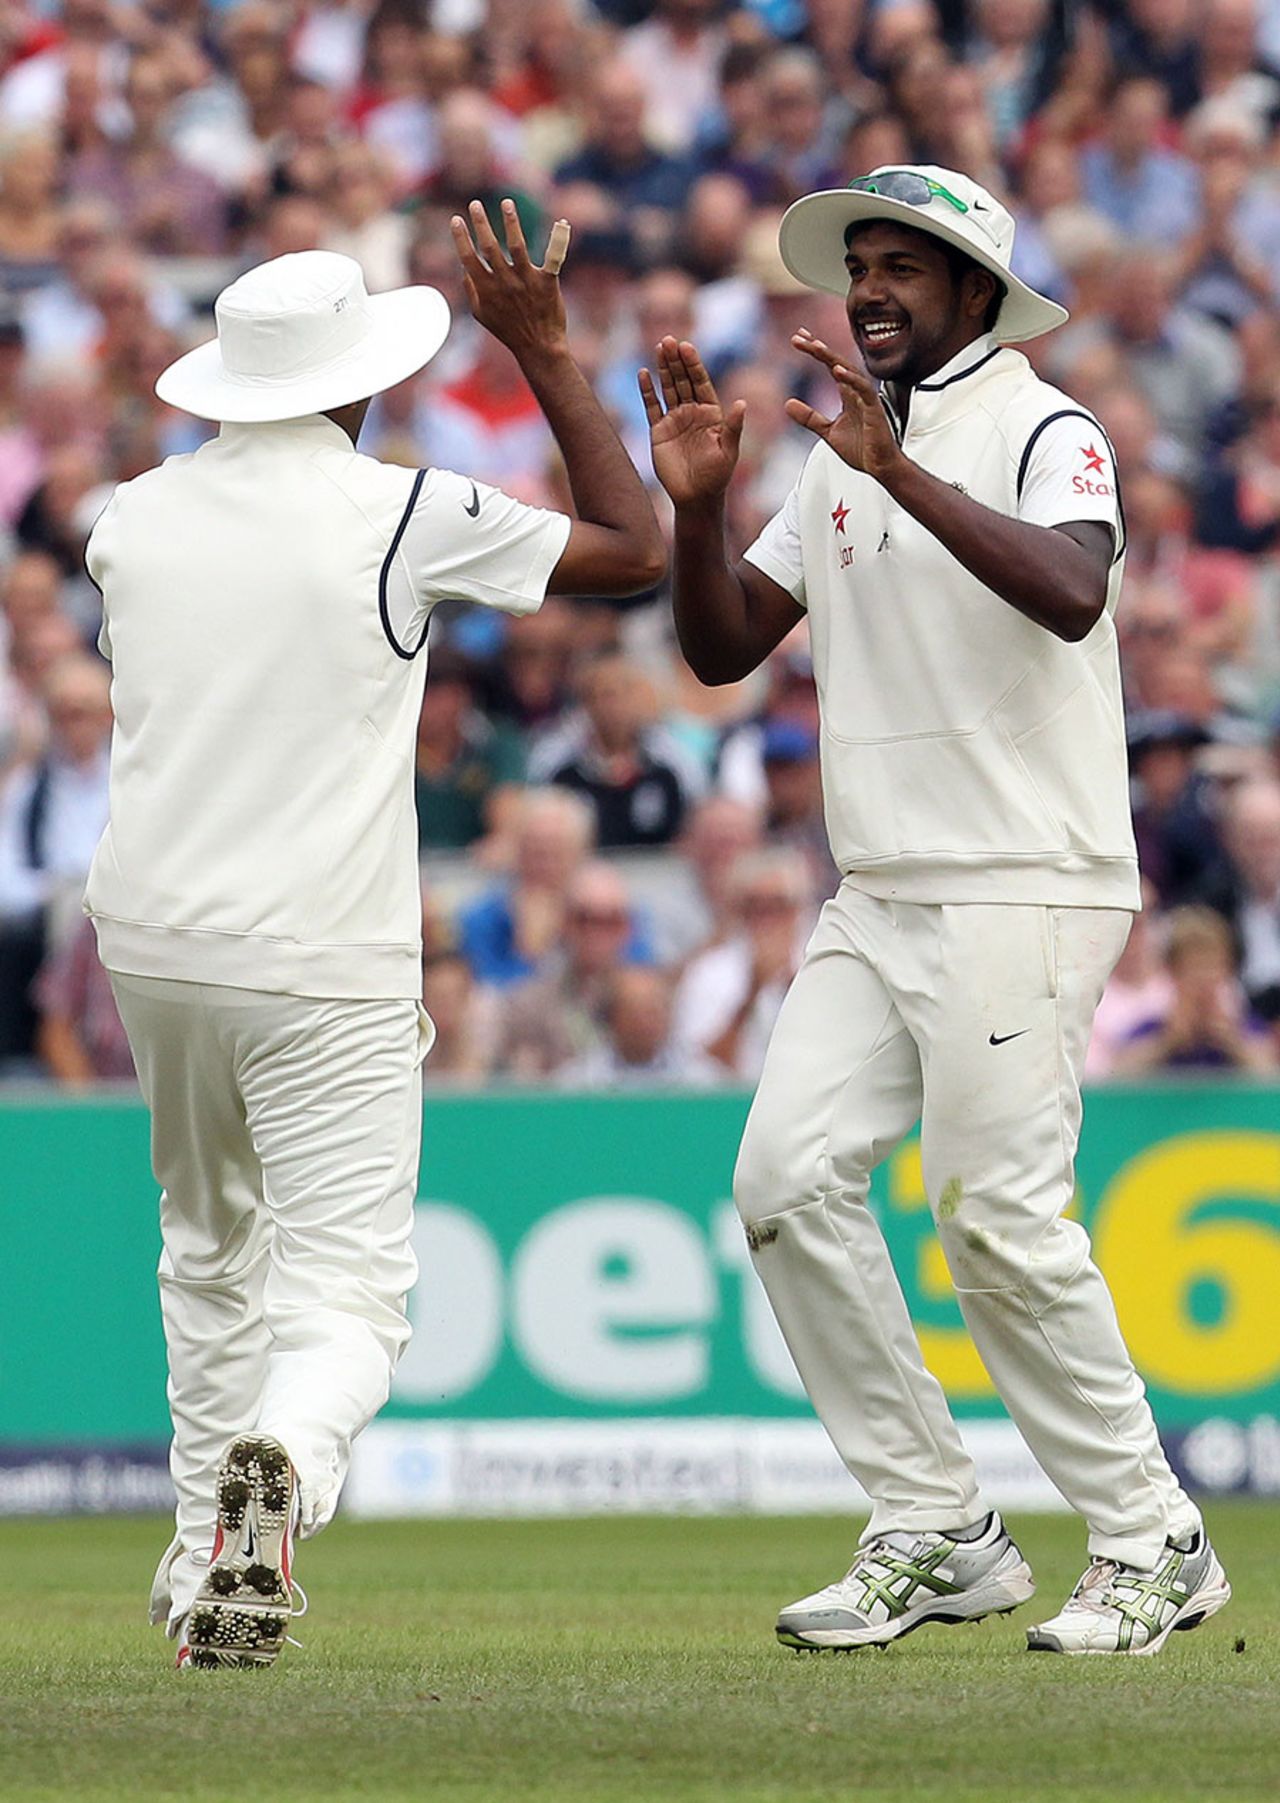 Varun Aaron is delighted after taking a smart catch at midwicket to dismiss Chris Jordan, England v India, 4th Test, Old Trafford, 2nd day, August 8, 2014